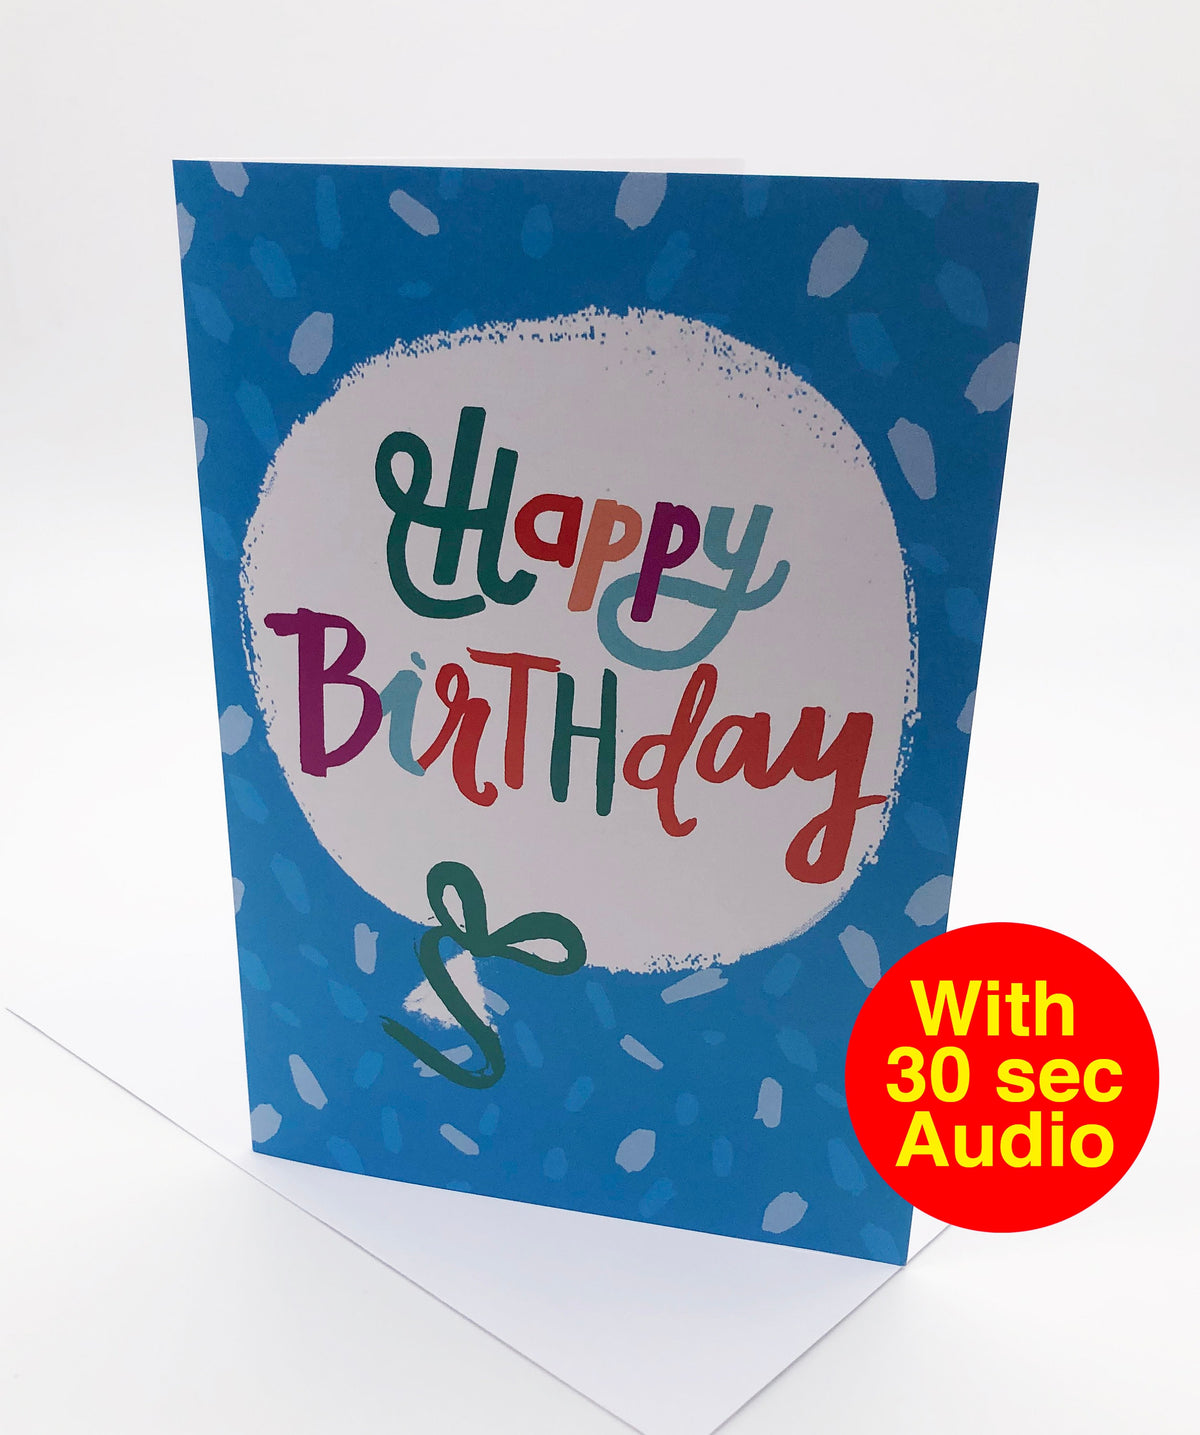 Recordable Audio Birthday Cards - Balloon - AB2205 - With 30 second Audio